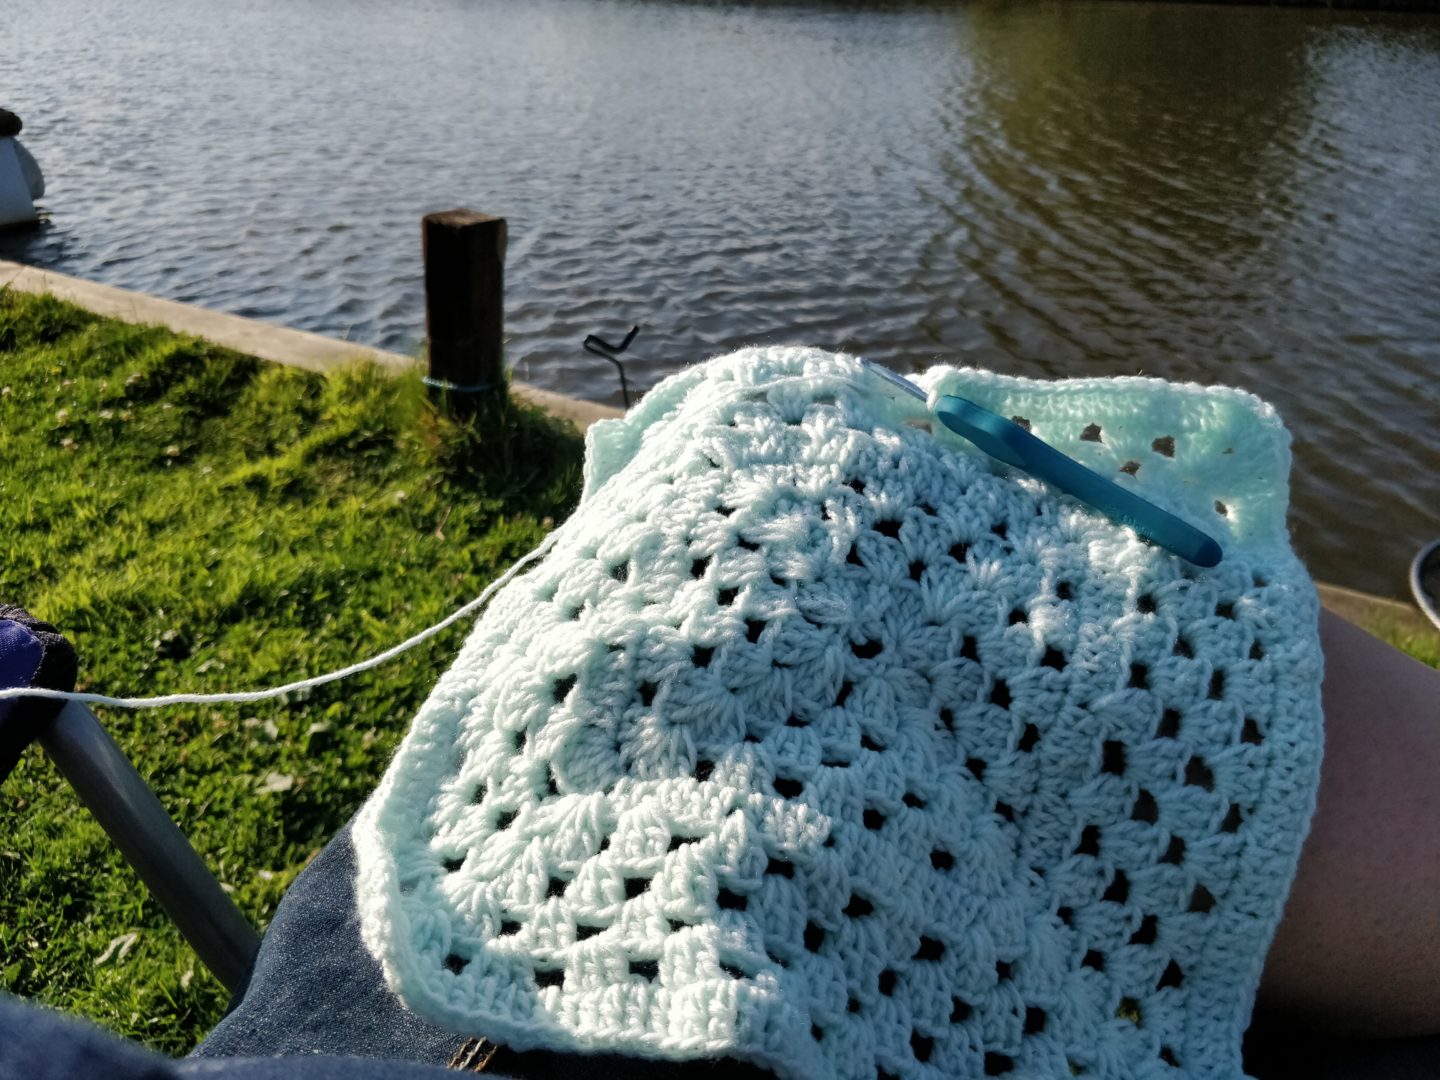 Crocheting Enjoy a slower pace of life on the Norfolk Broads